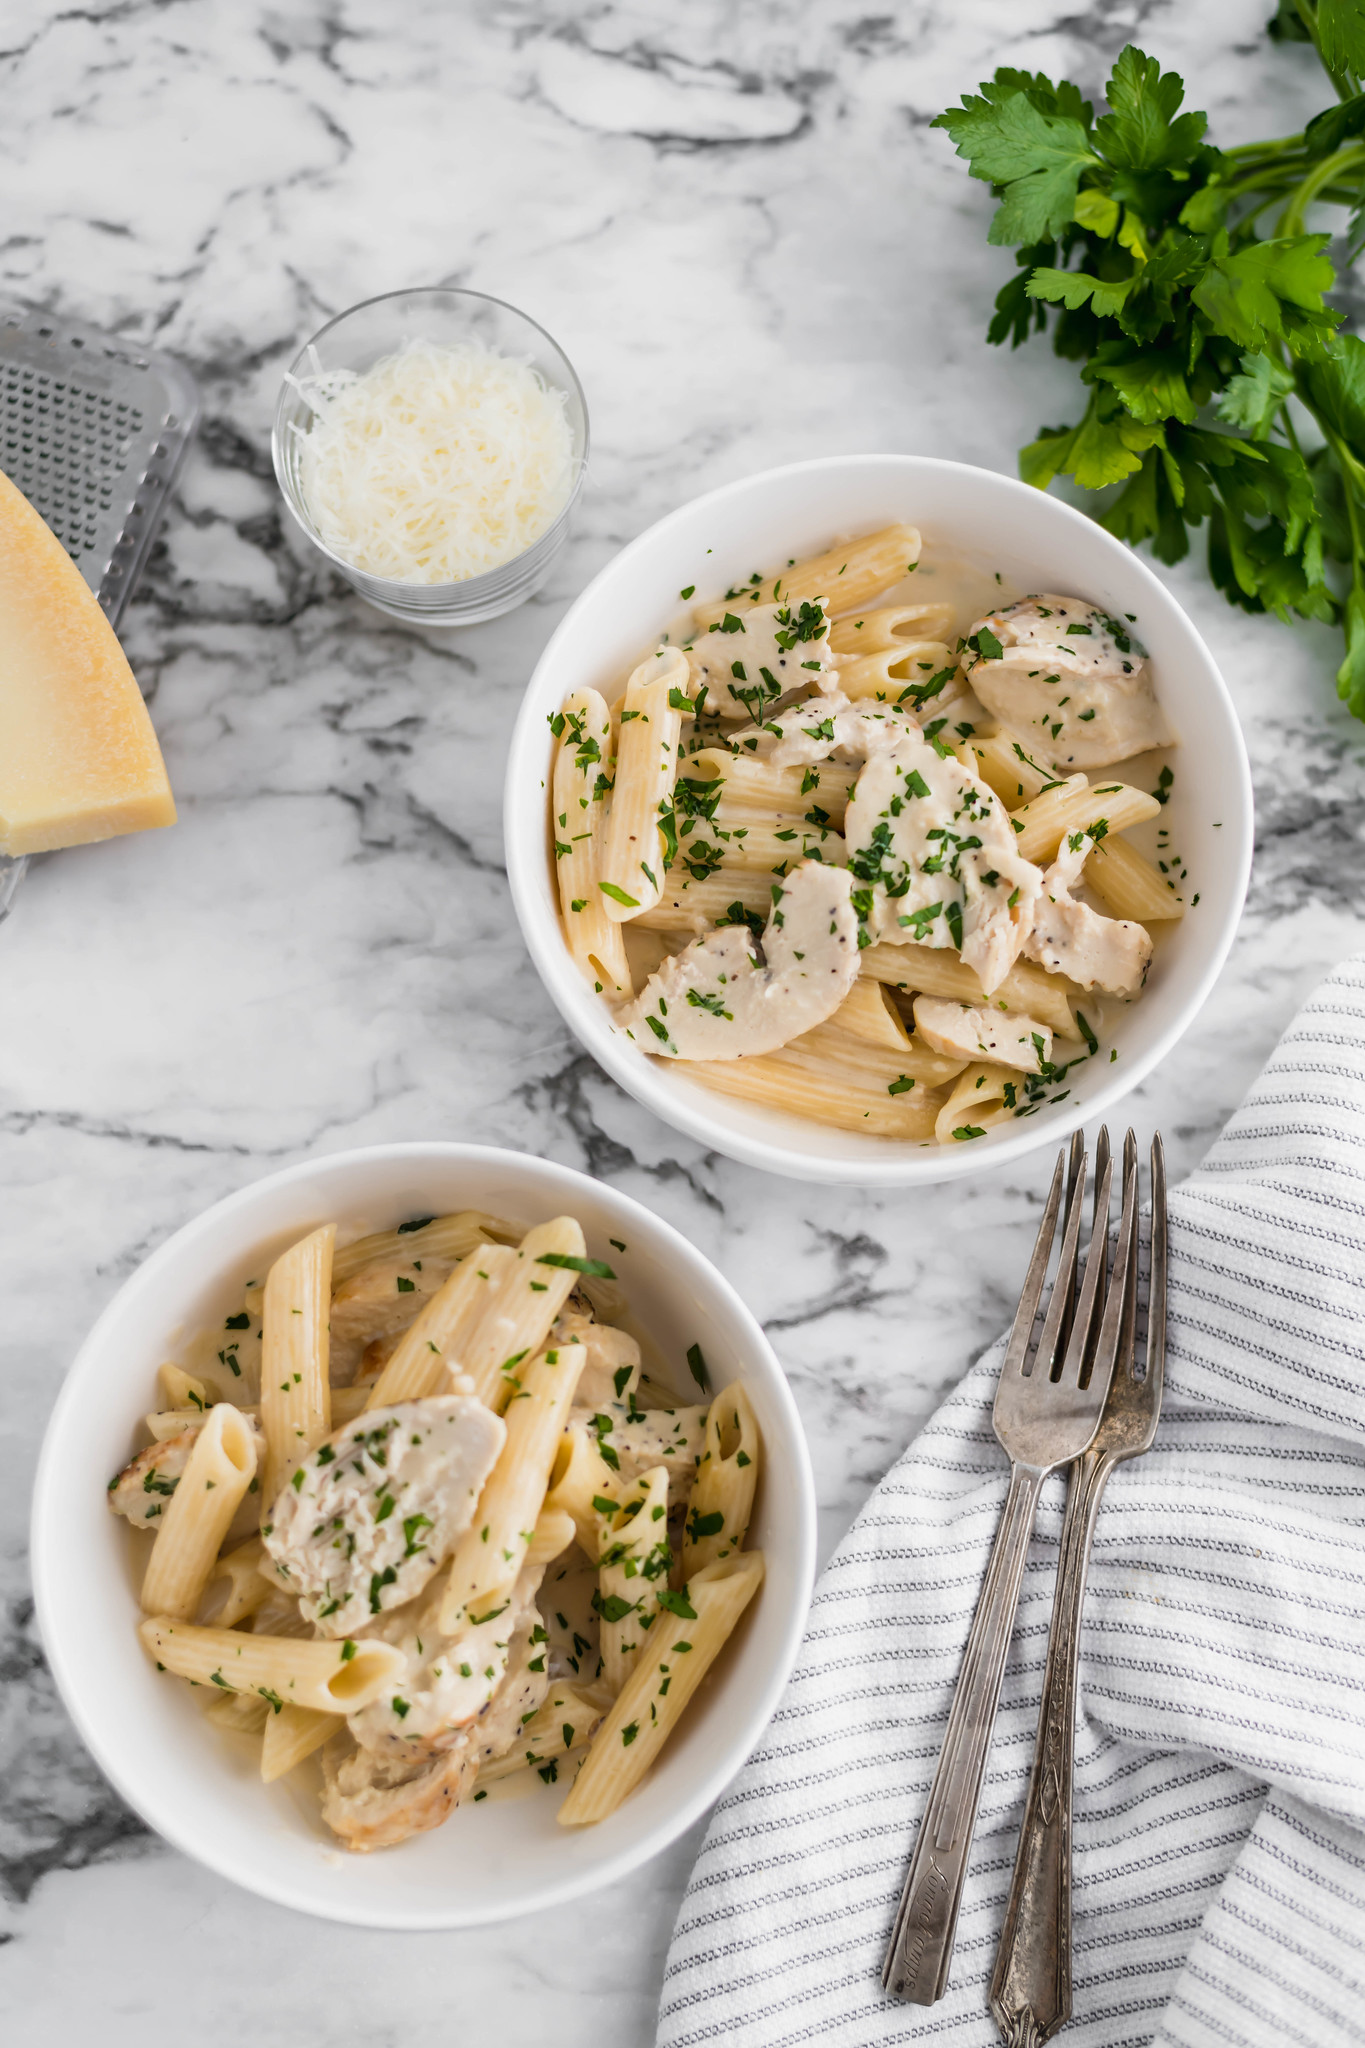 Get a family favorite on the table in less than 30 minutes. Instant Pot Chicken Alfredo is simple, quick and delicious.